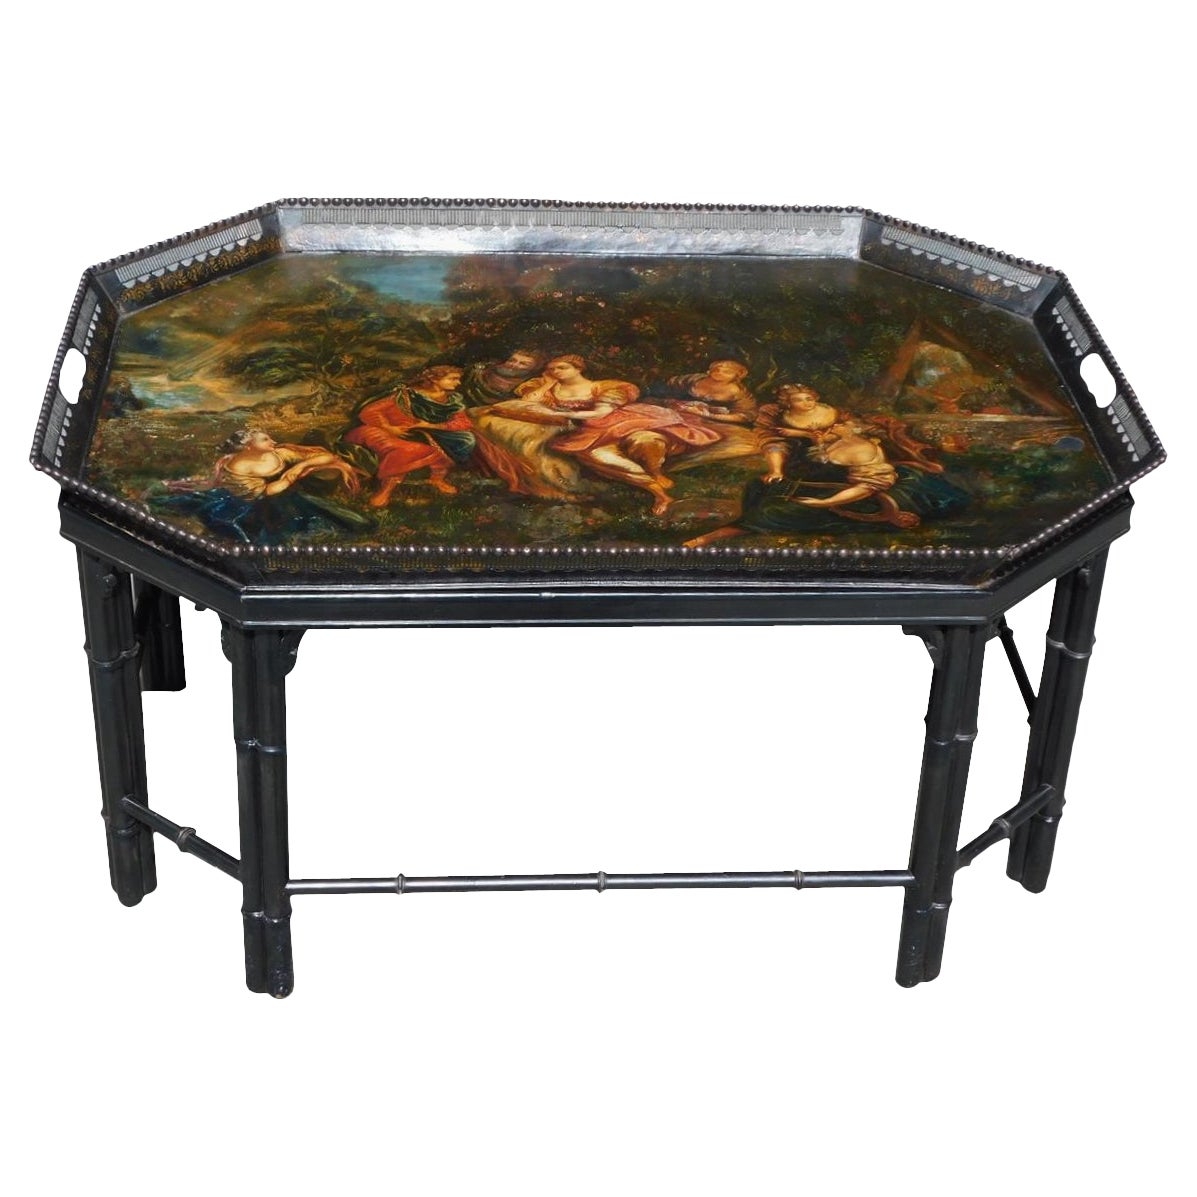 Italian Tole Figural Landscape Gallery Tray on Faux Bamboo Stand, Circa 1815 For Sale